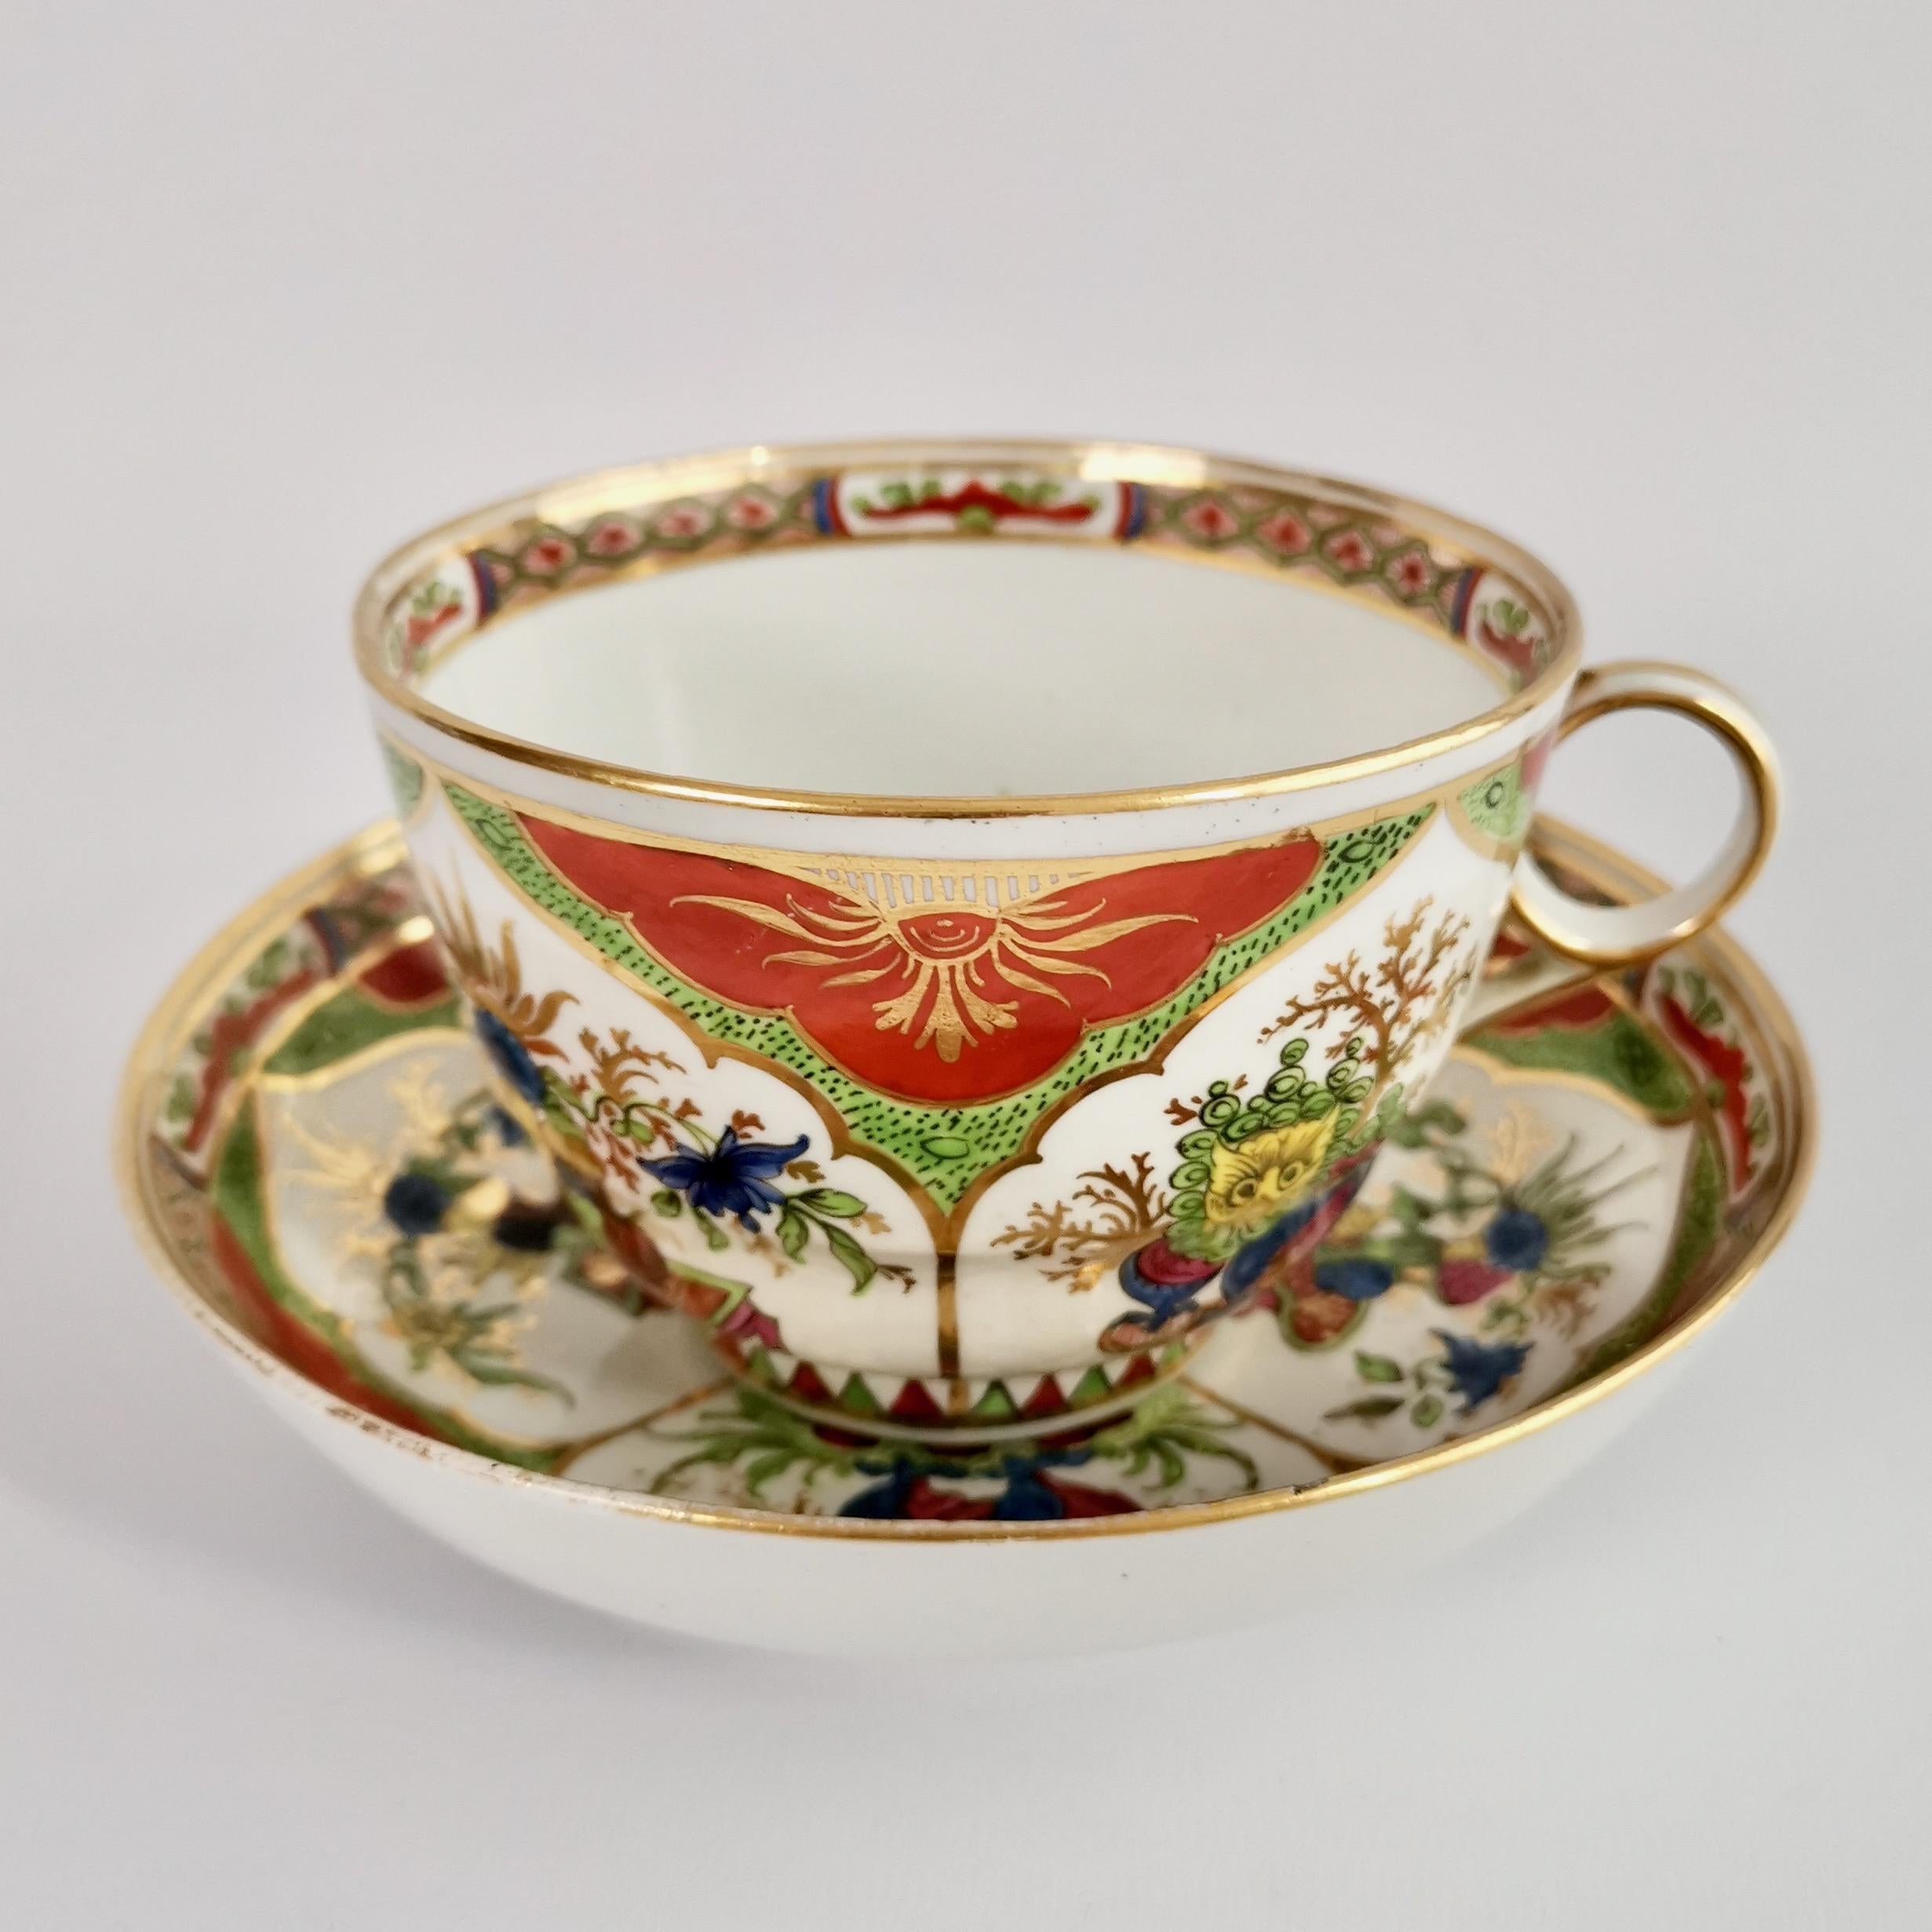 George III Porcelain Breakfast Cup Chamberlains Worcester, Dragons in Compartments